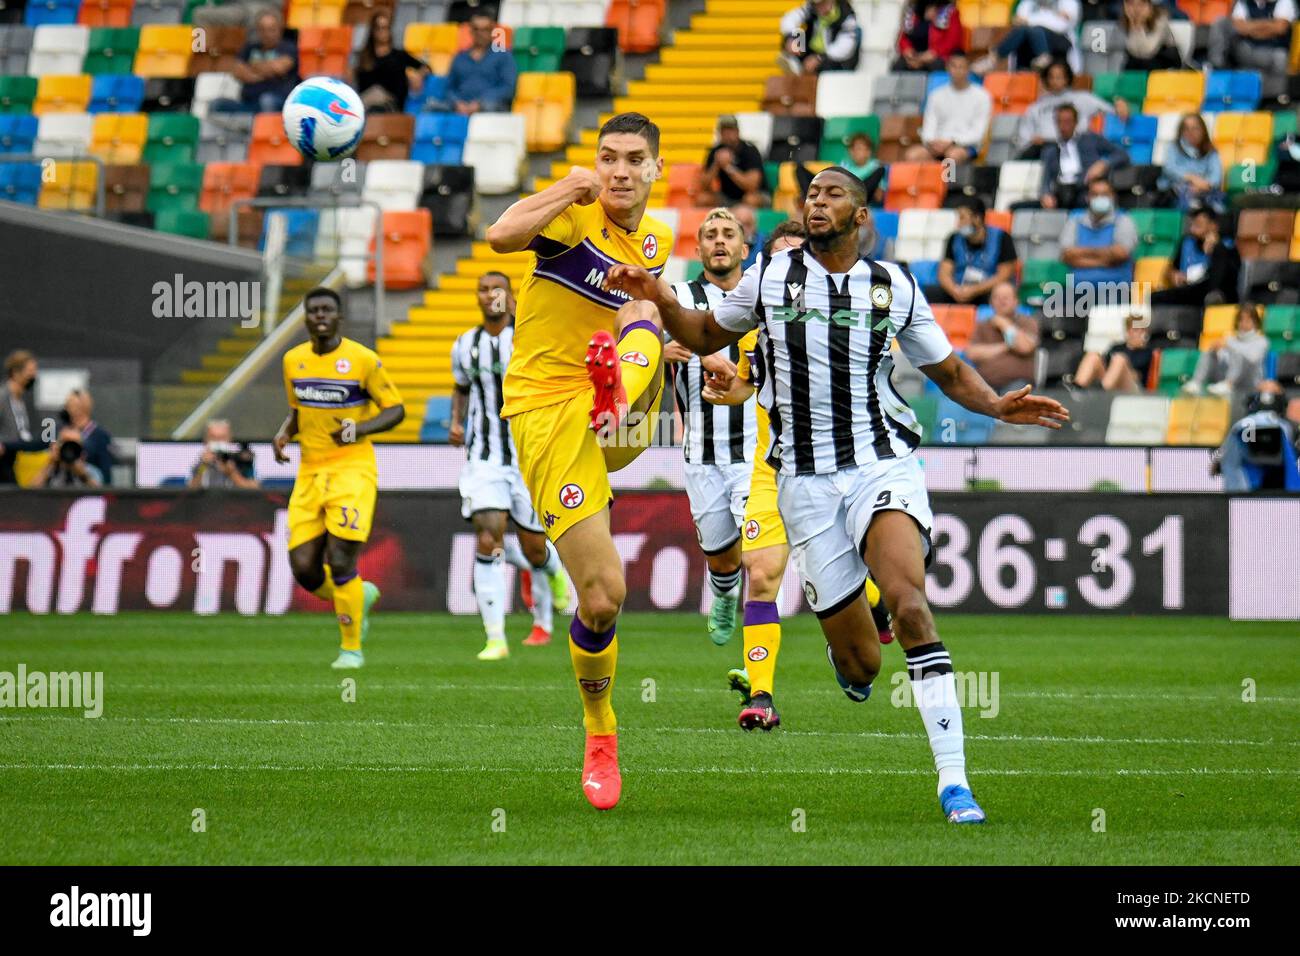 Nikola Milenkovic (Fiorentina) carries the ball hindered by Norberto Bercique Gomes Betuncal (Udinese) during the Italian football Serie A match Udinese Calcio vs ACF Fiorentina on settembre 26, 2021 at the Friuli - Dacia Arena stadium in Udine, Italia (Photo by Ettore Griffoni/LiveMedia/NurPhoto) Stock Photo